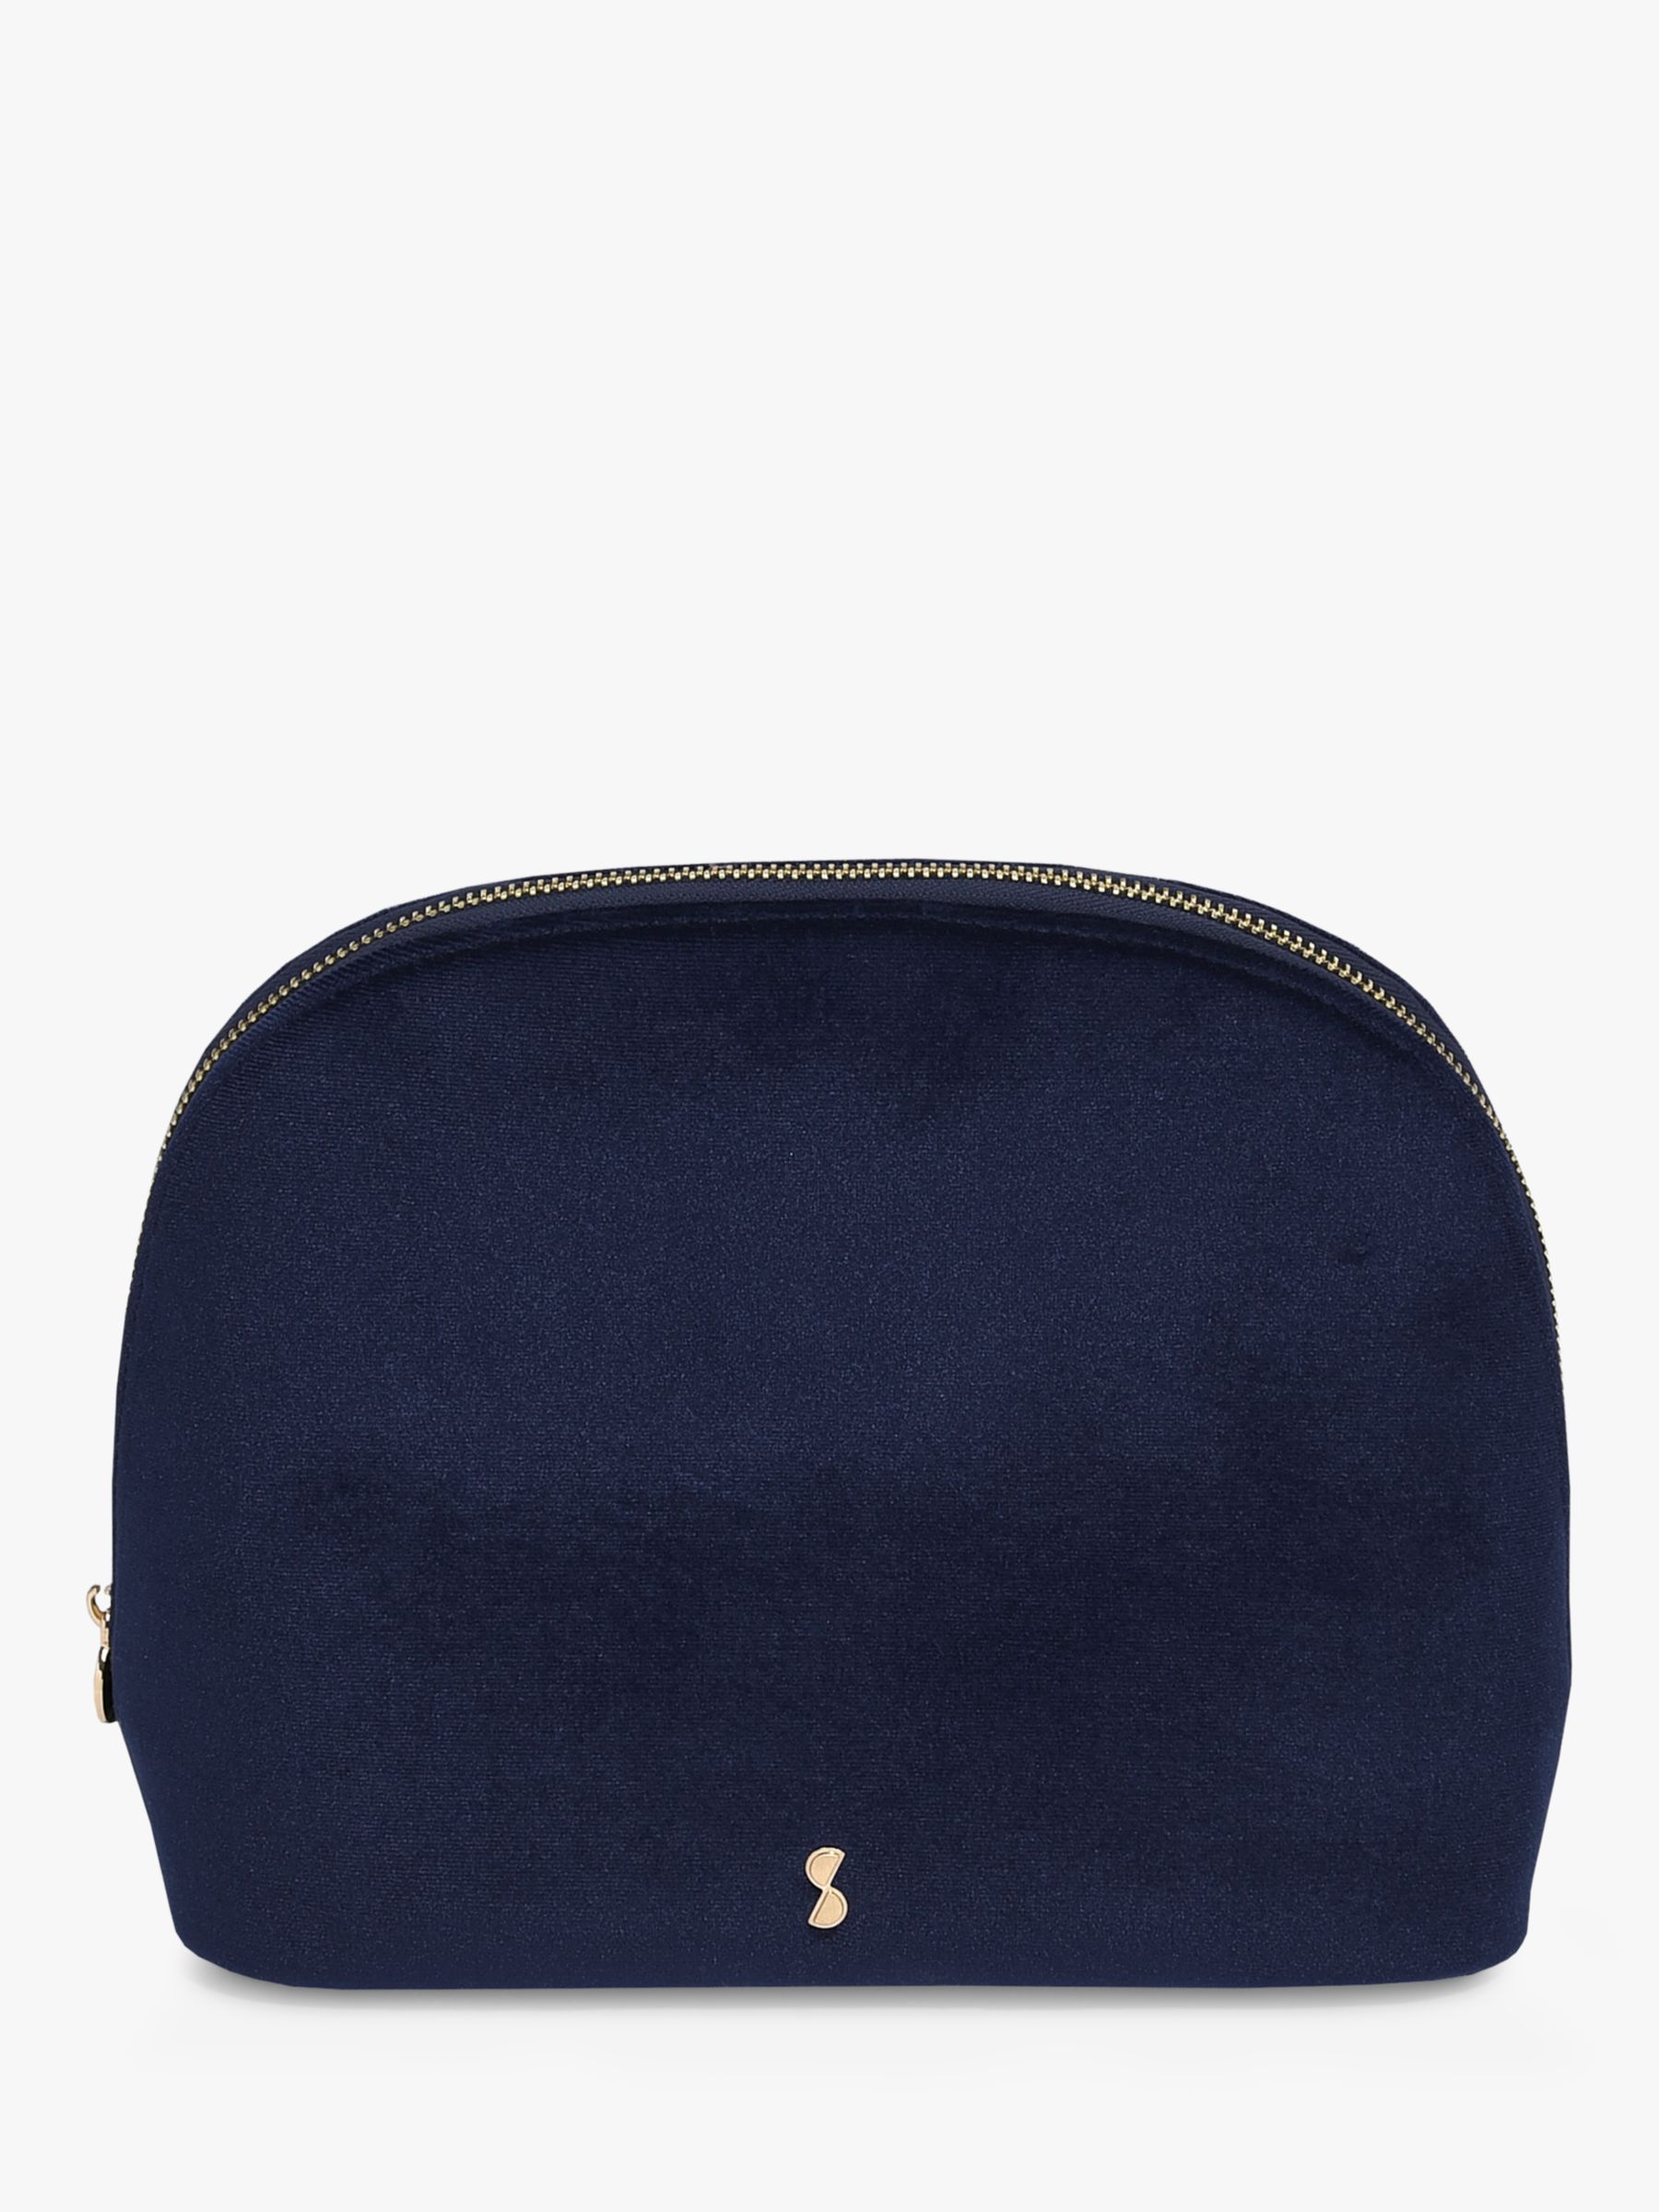 Stackers Curve Cosmetics Bag, Set of 2, Navy 4